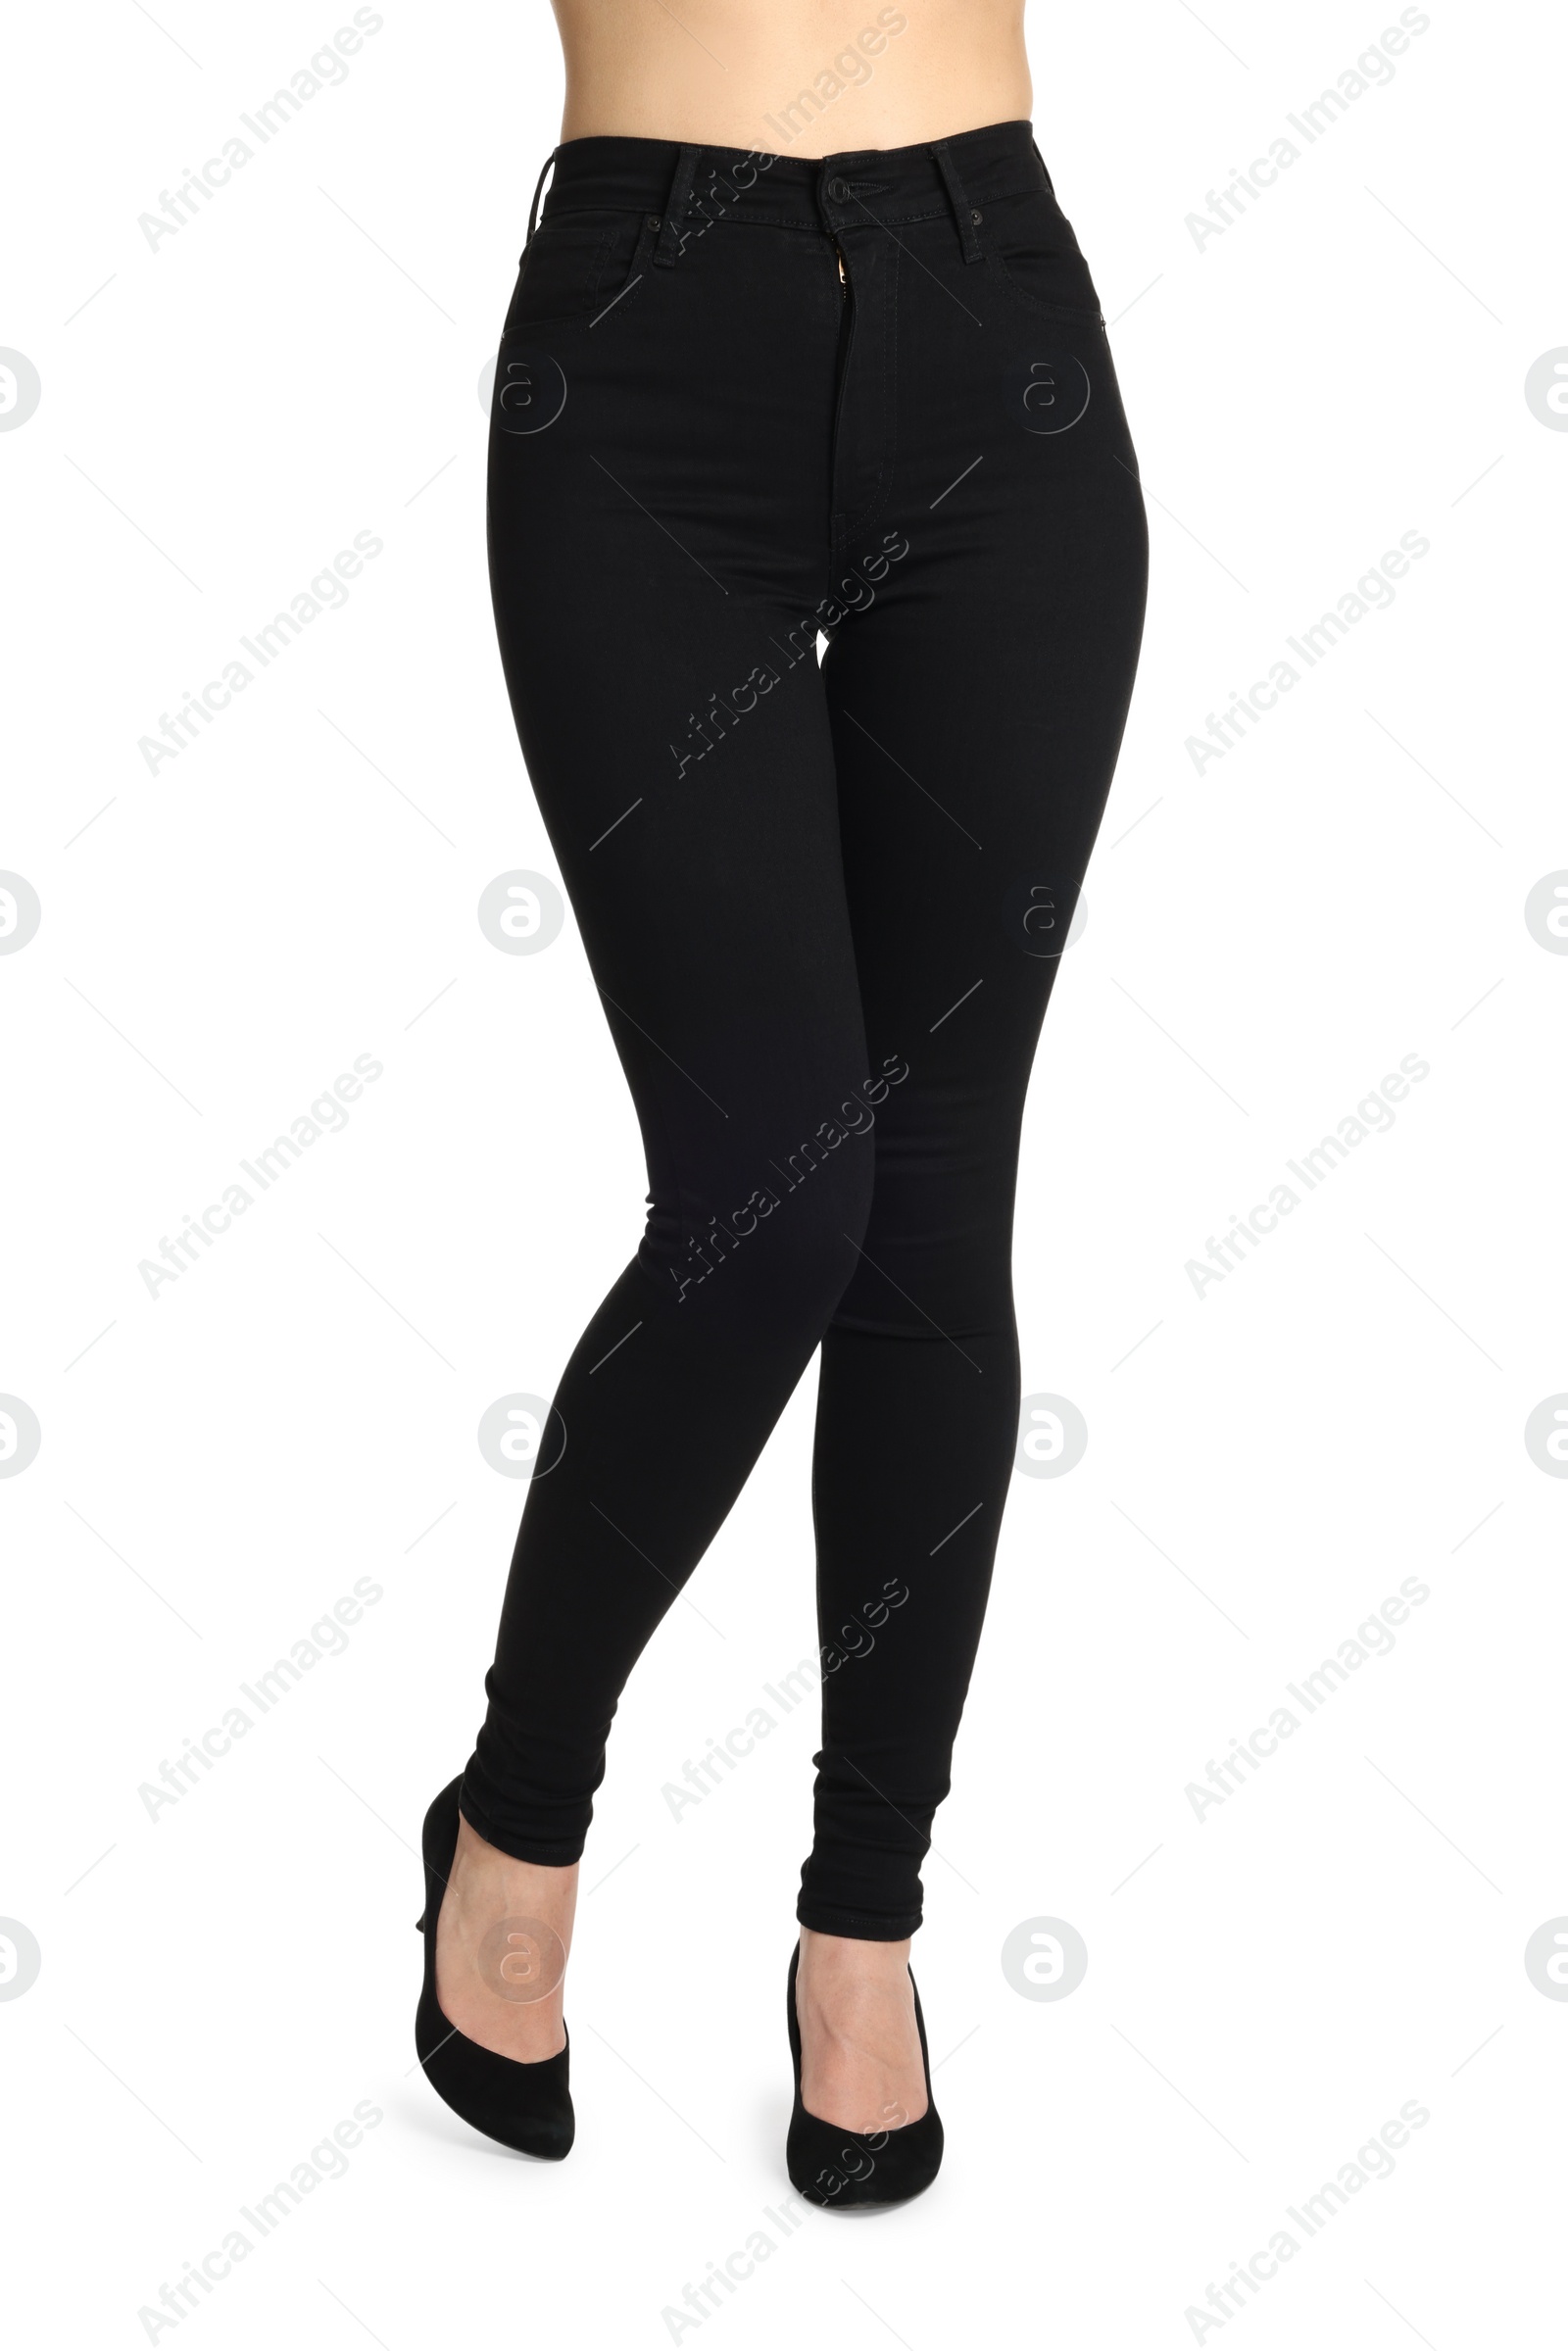 Photo of Woman wearing stylish black jeans and high heels shoes on white background, closeup